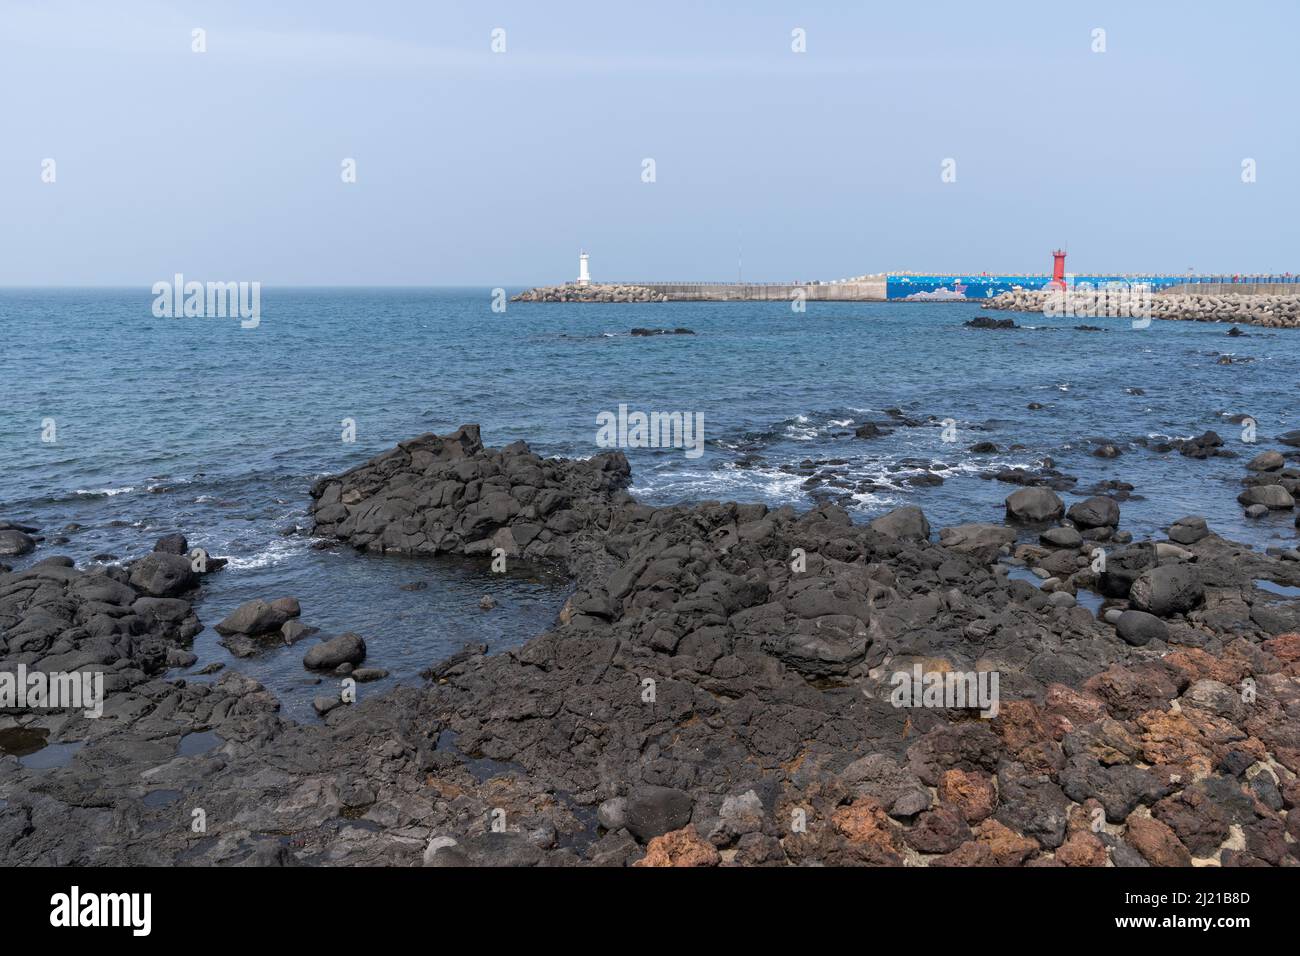 Black volcanic rocks at Moseulpo Port on Jeju Island, South Korea. Two lighthouses and a colourful mural can be seen on the concrete breakers behind. Stock Photo